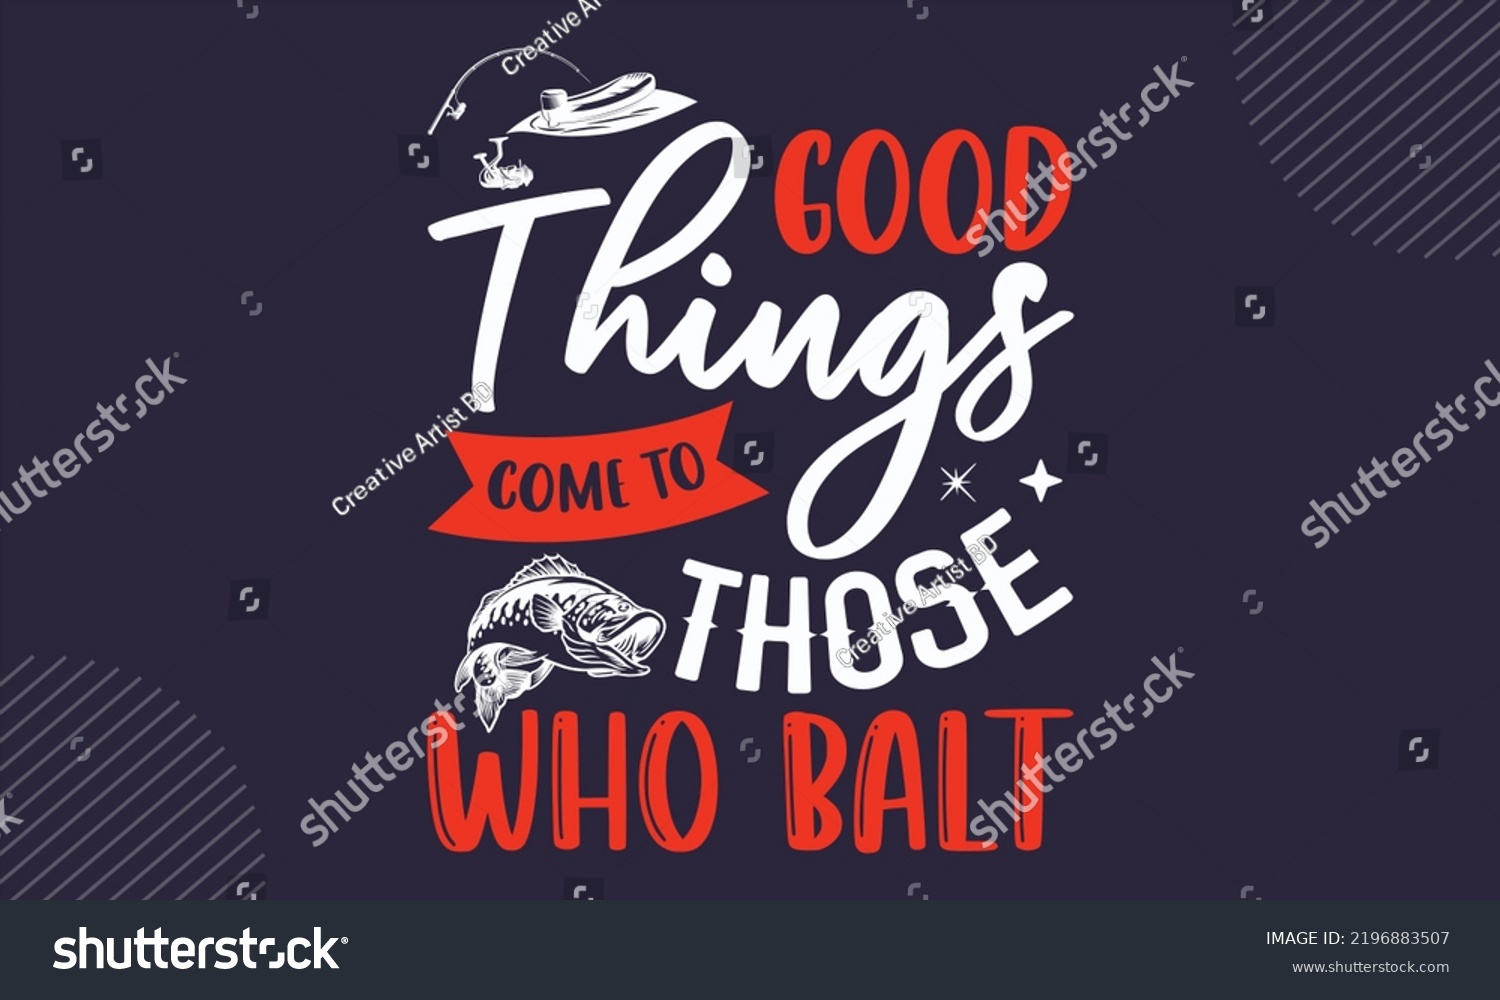 SVG of Good Things Come To Those Who Balt - Fishing T shirt Design, Modern calligraphy, Cut Files for Cricut Svg, Illustration for prints on bags, posters svg